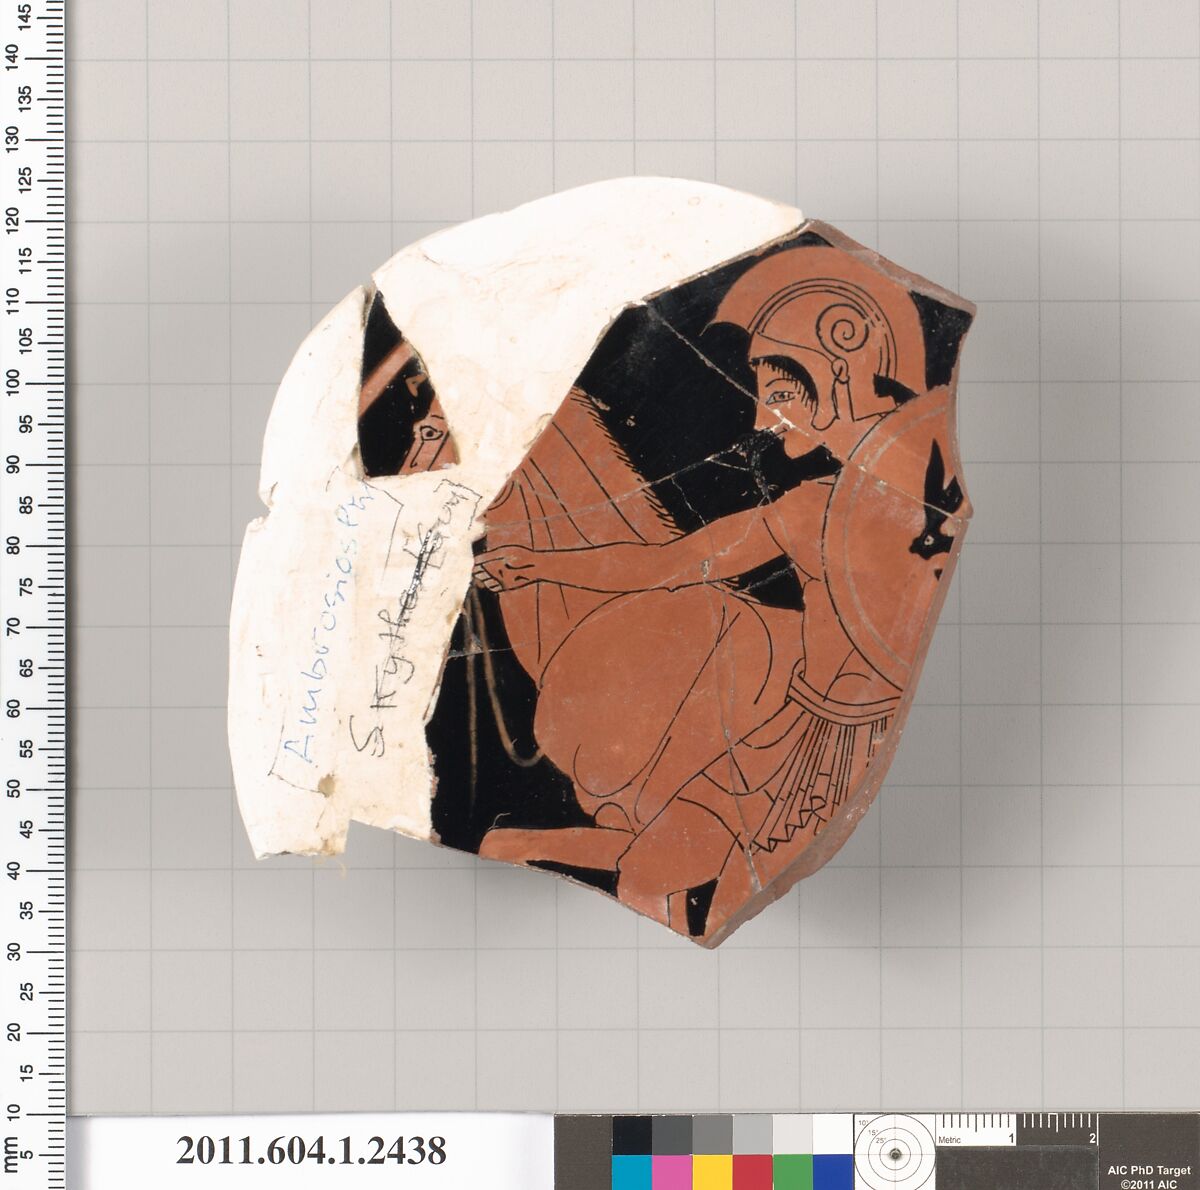 Terracotta fragment of a kylix (drinking cup), Attributed to the Ambrosios Painter [DvB], Terracotta, Greek, Attic 